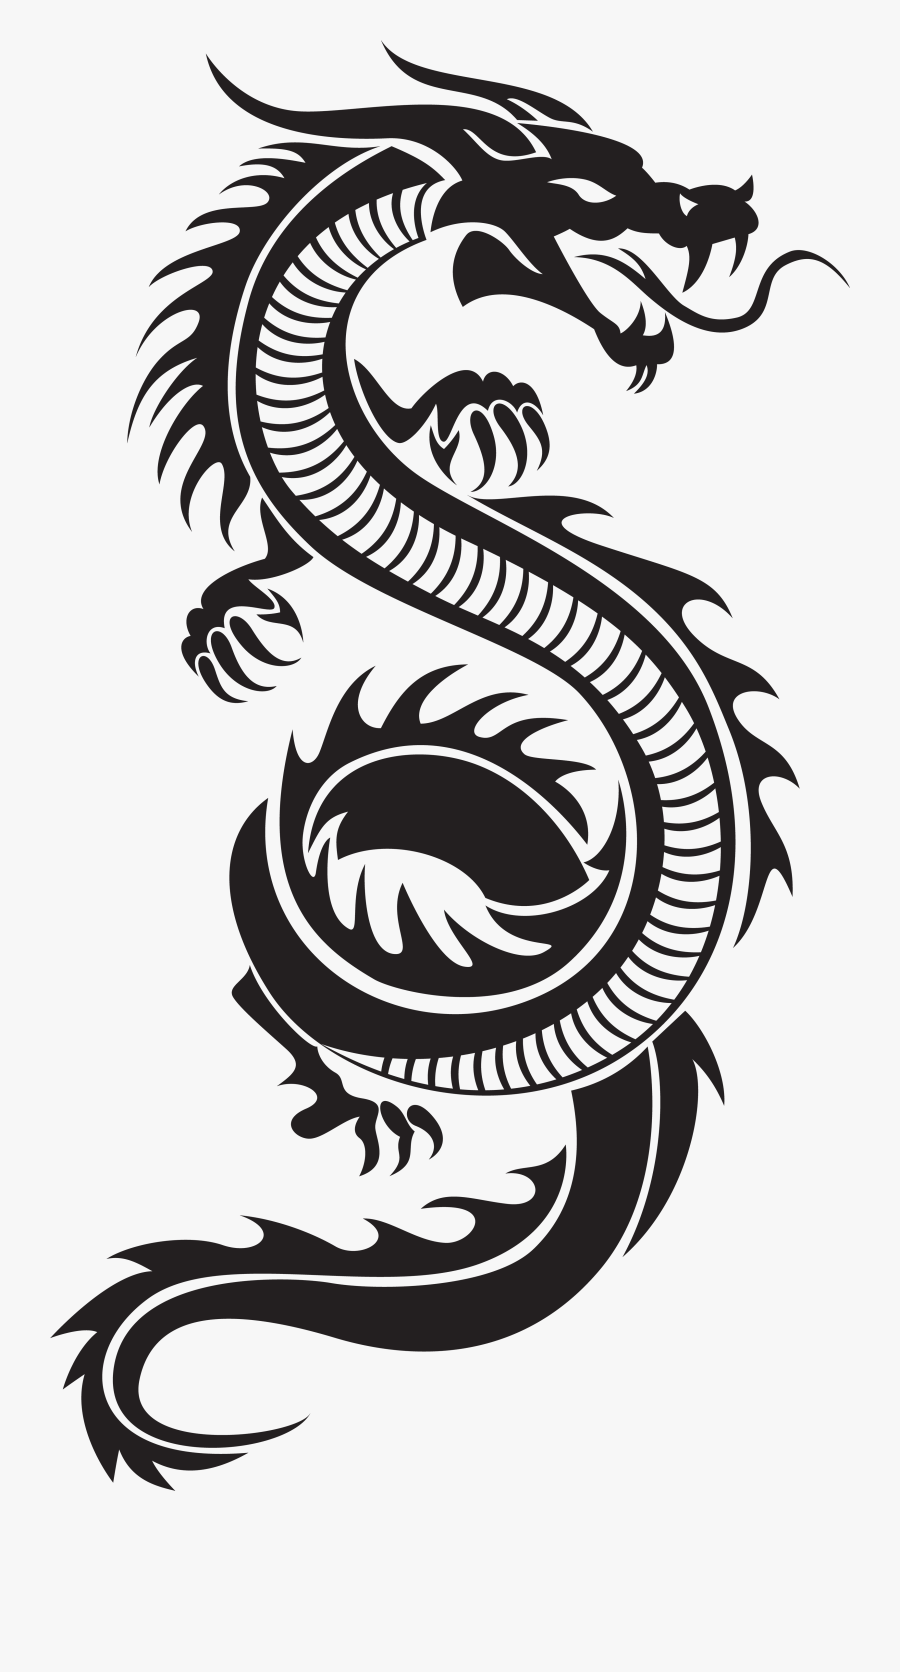 Chinese Dragon Silhouette Png Clip Art - Chinese Dragon Silhouette Png, Transparent Clipart